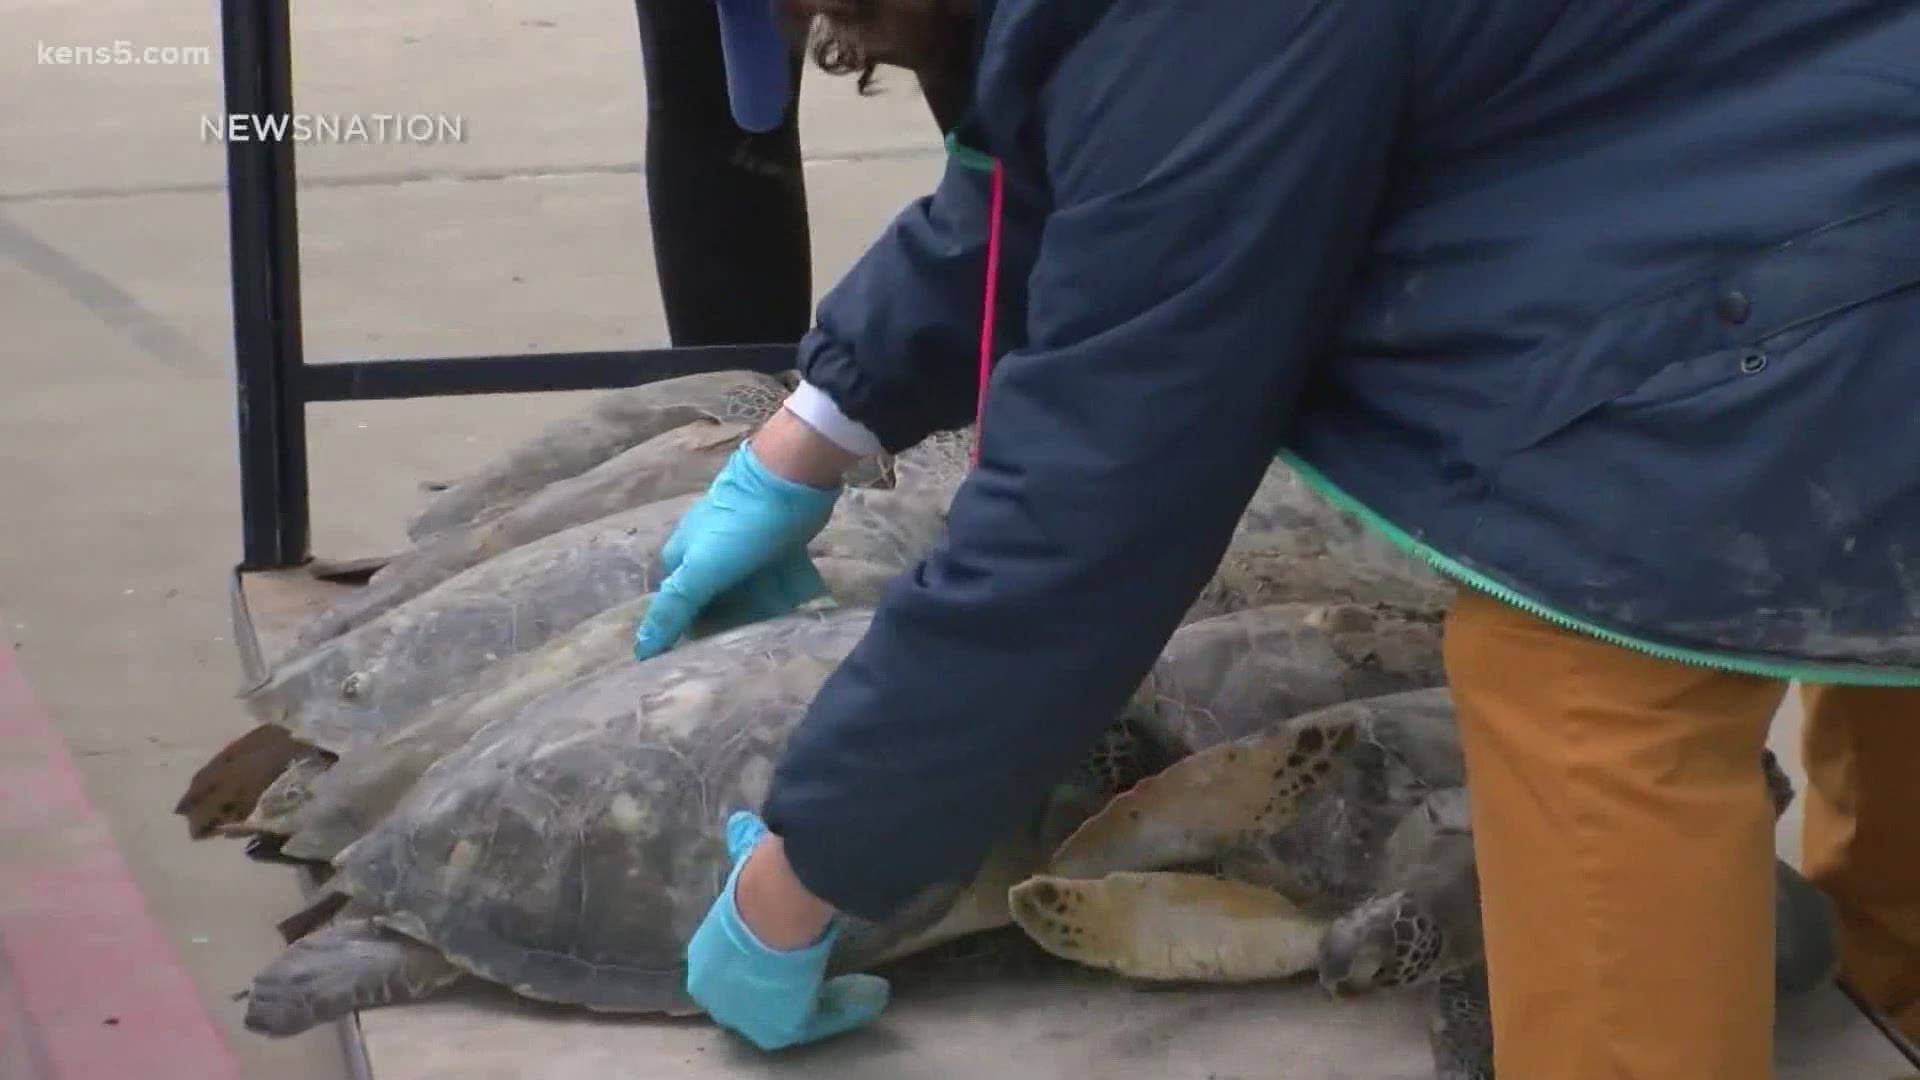 About 2,000 sea turtles were rescued from the freezing waters and subsequently rehabbed last week.